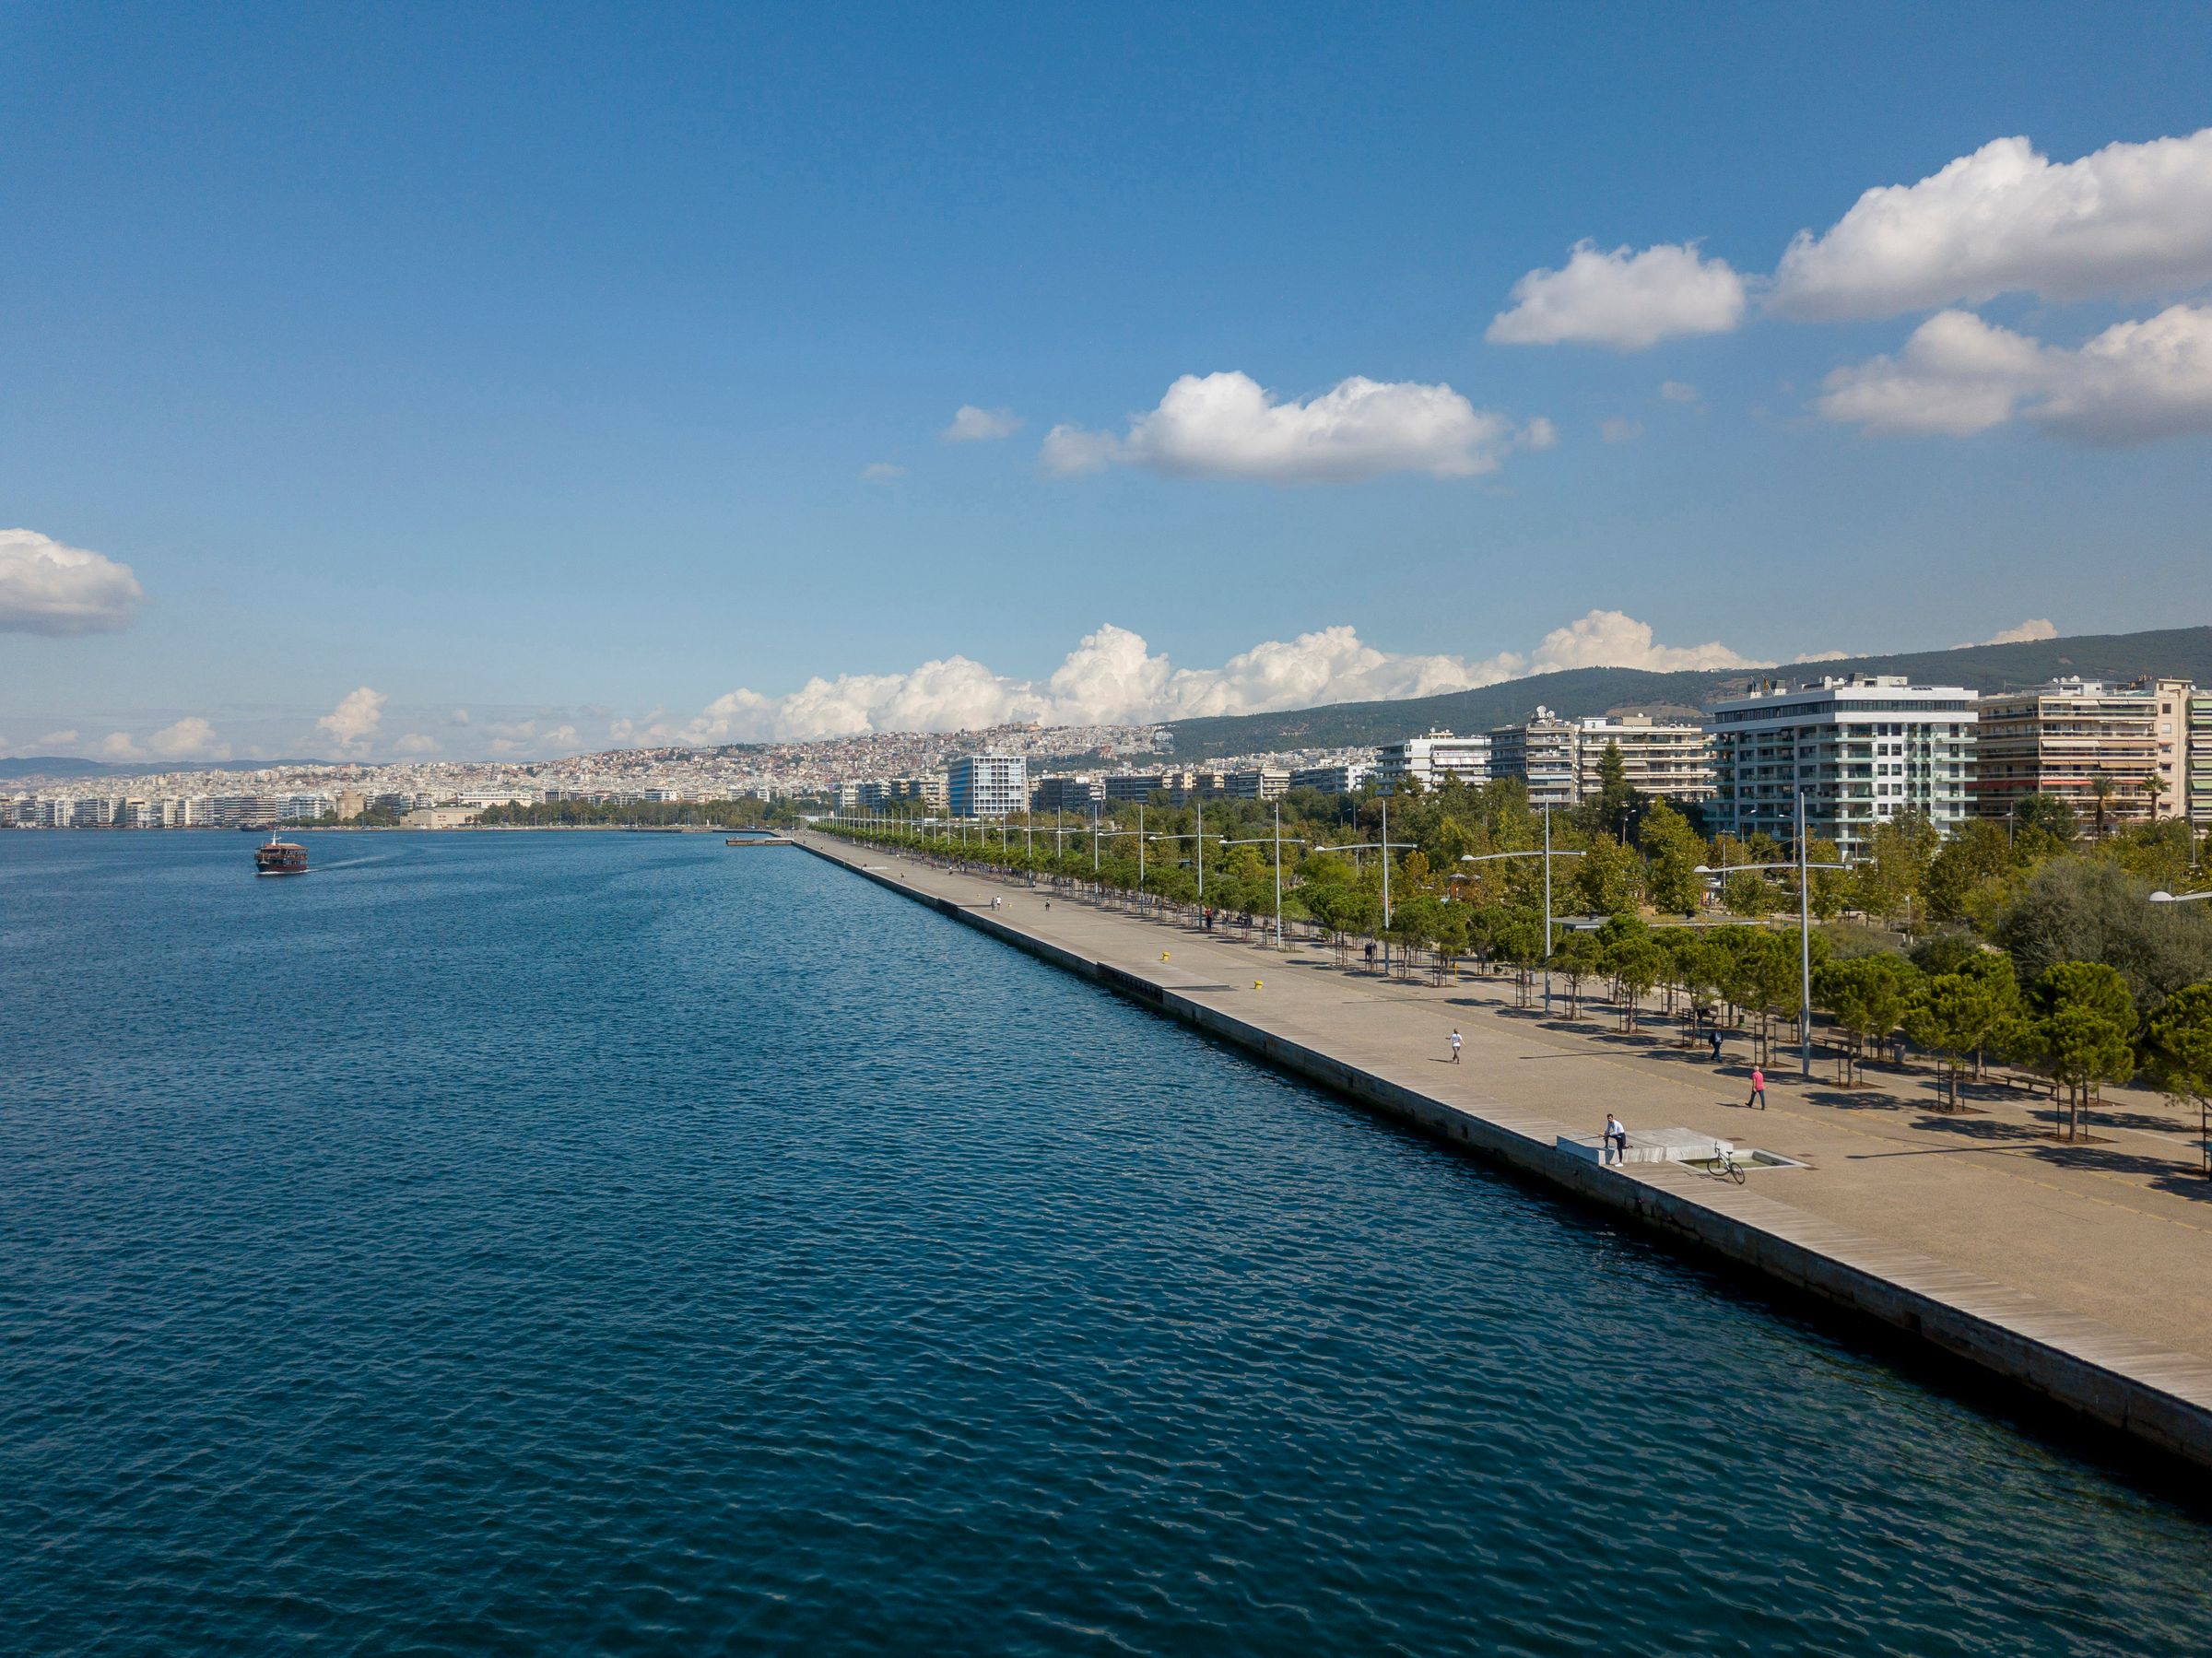 The waterfront of Thessaloniki